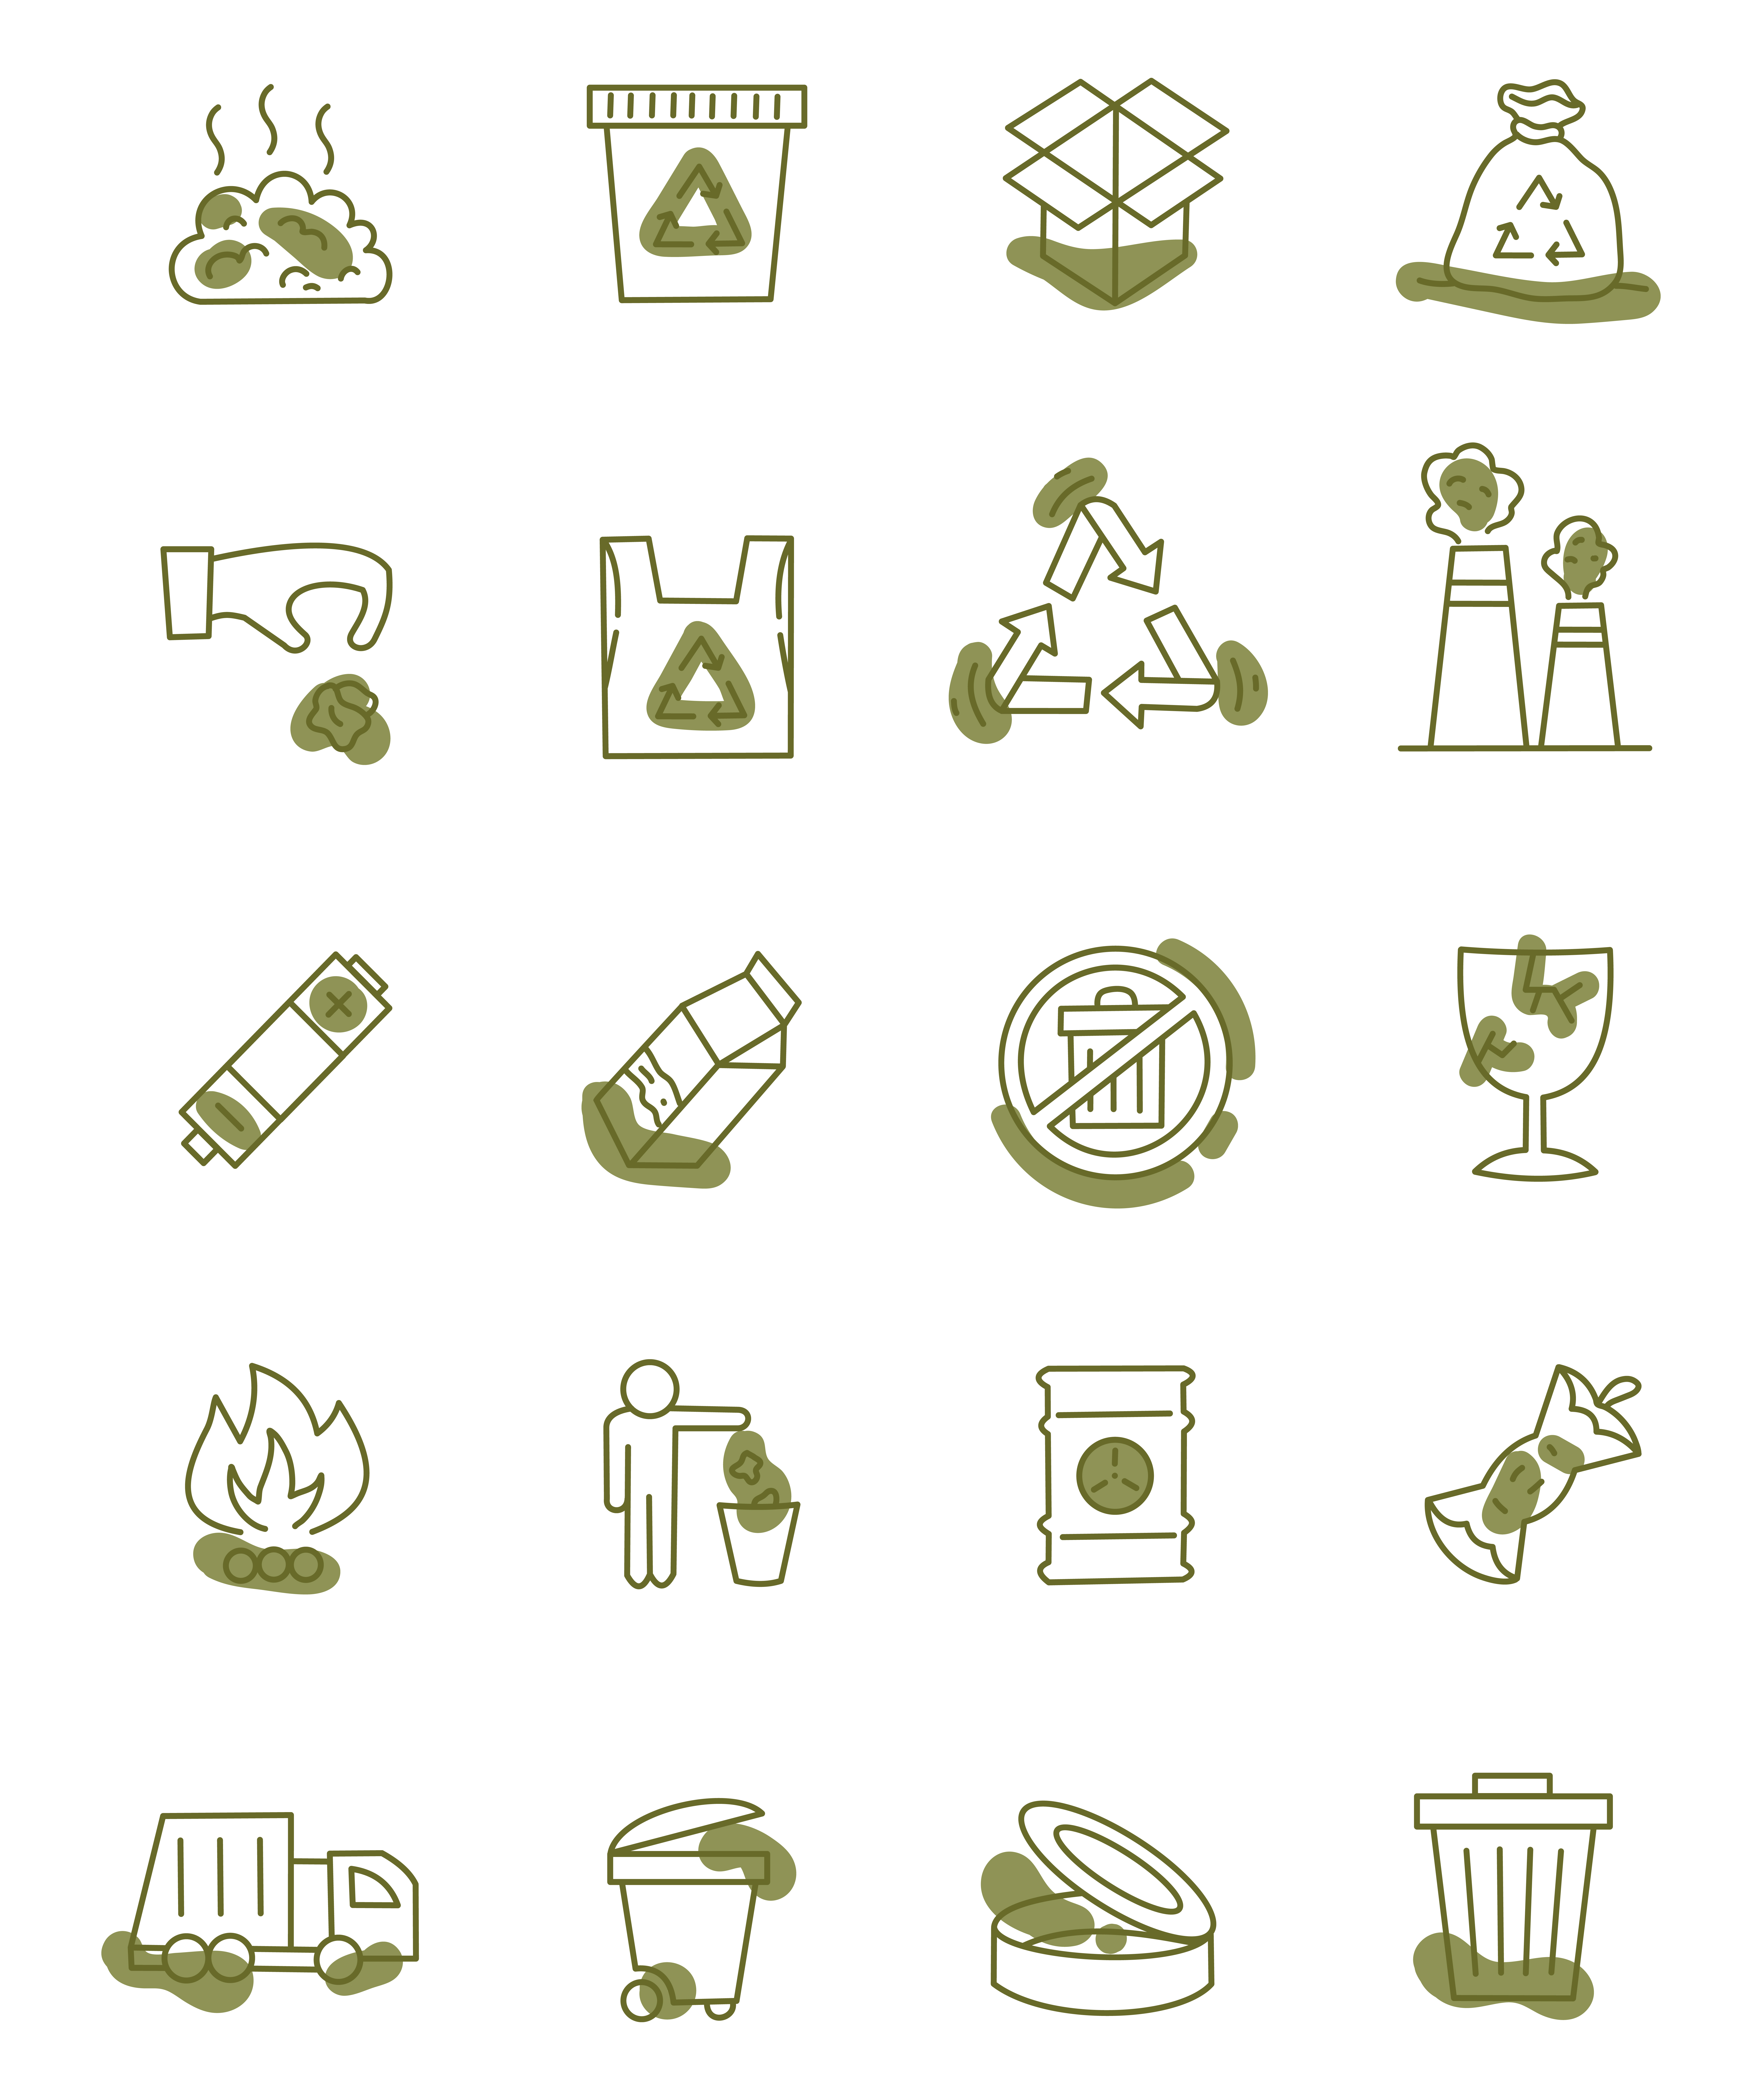 Bunch of different types of signs and symbols.